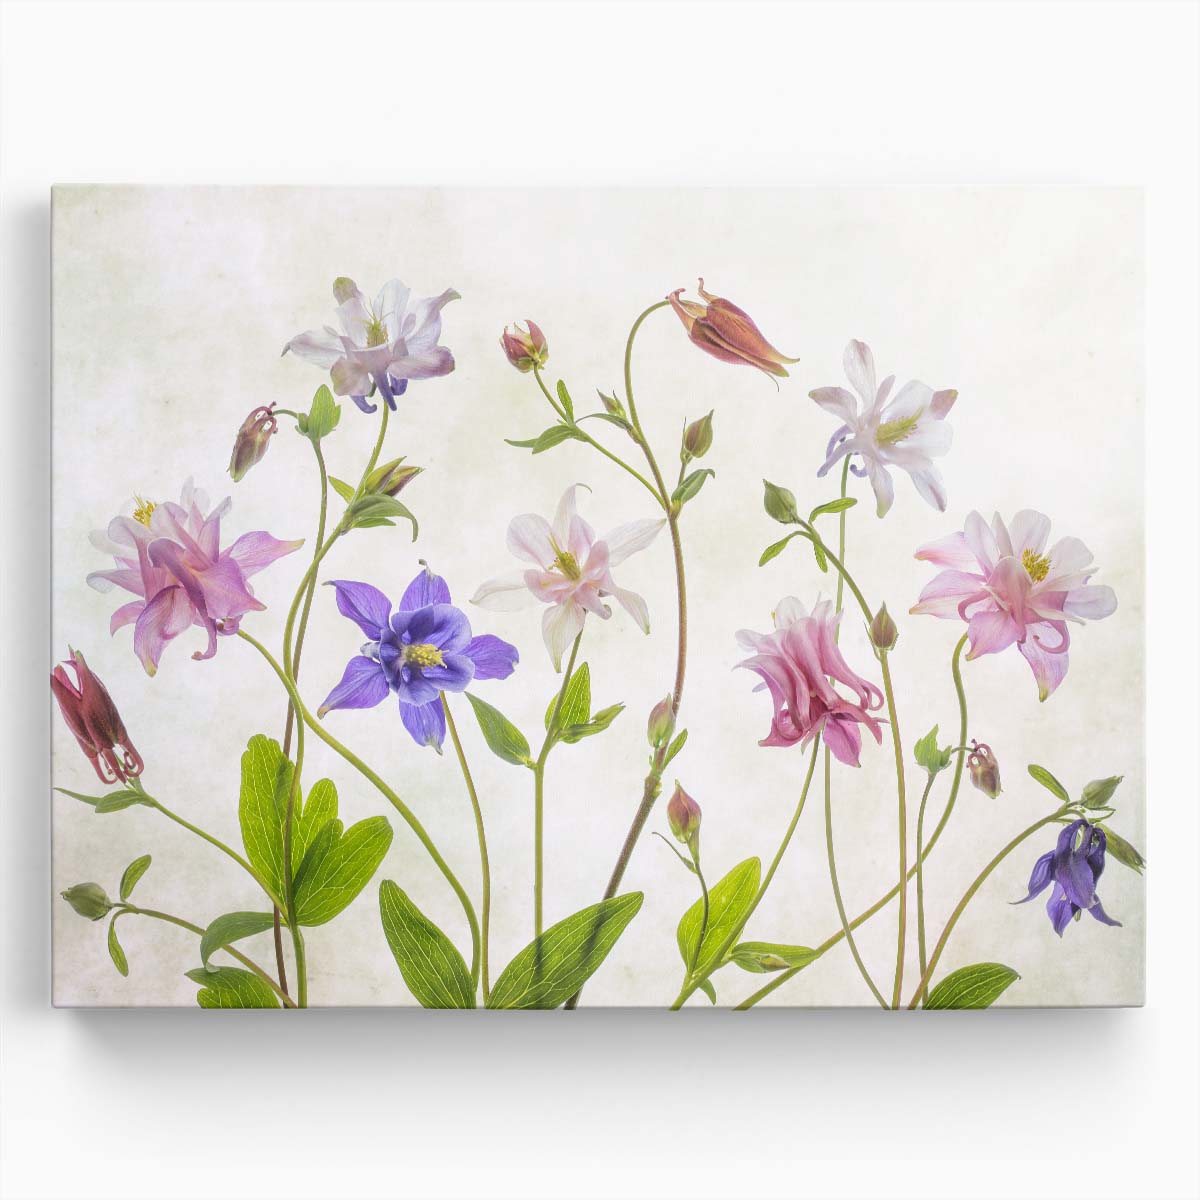 Pastel Columbine Bloom Macro Floral Photography Wall Art by Luxuriance Designs. Made in USA.